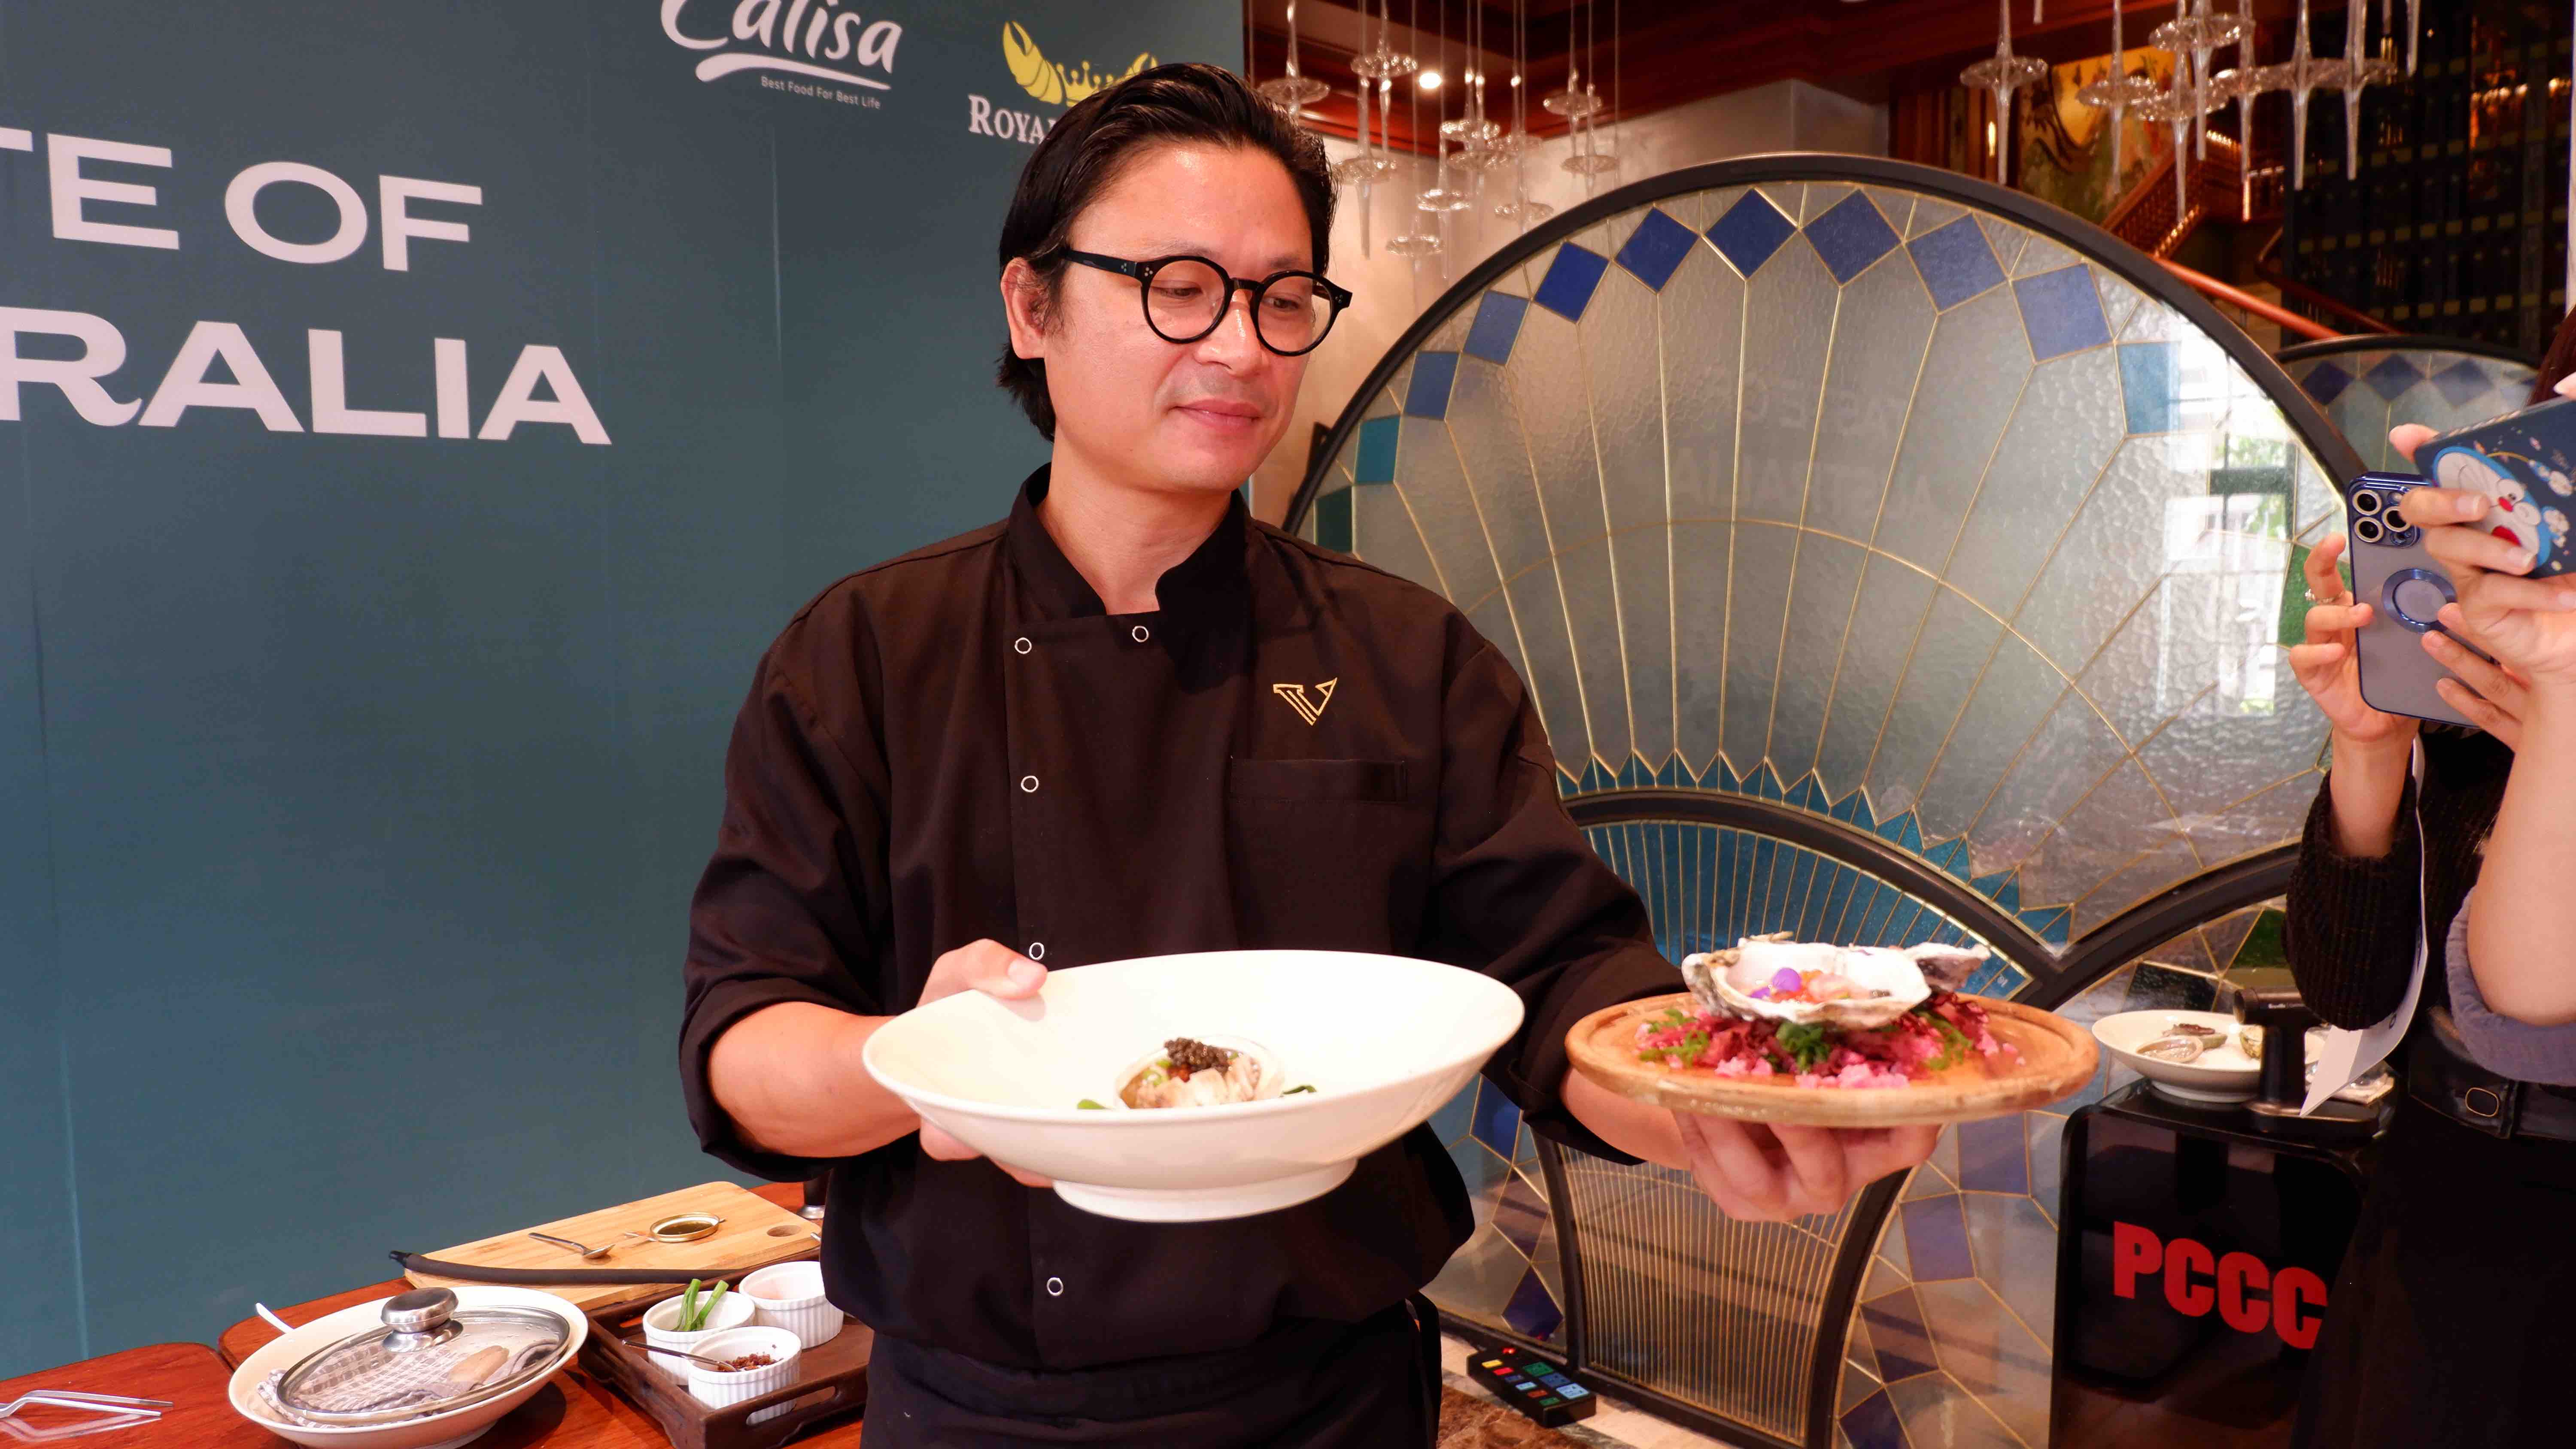 Chef Luke Nguyen showcases his two dishes made from Australian high-end abalone and oyster. Photo: Linh To / Tuoi Tre